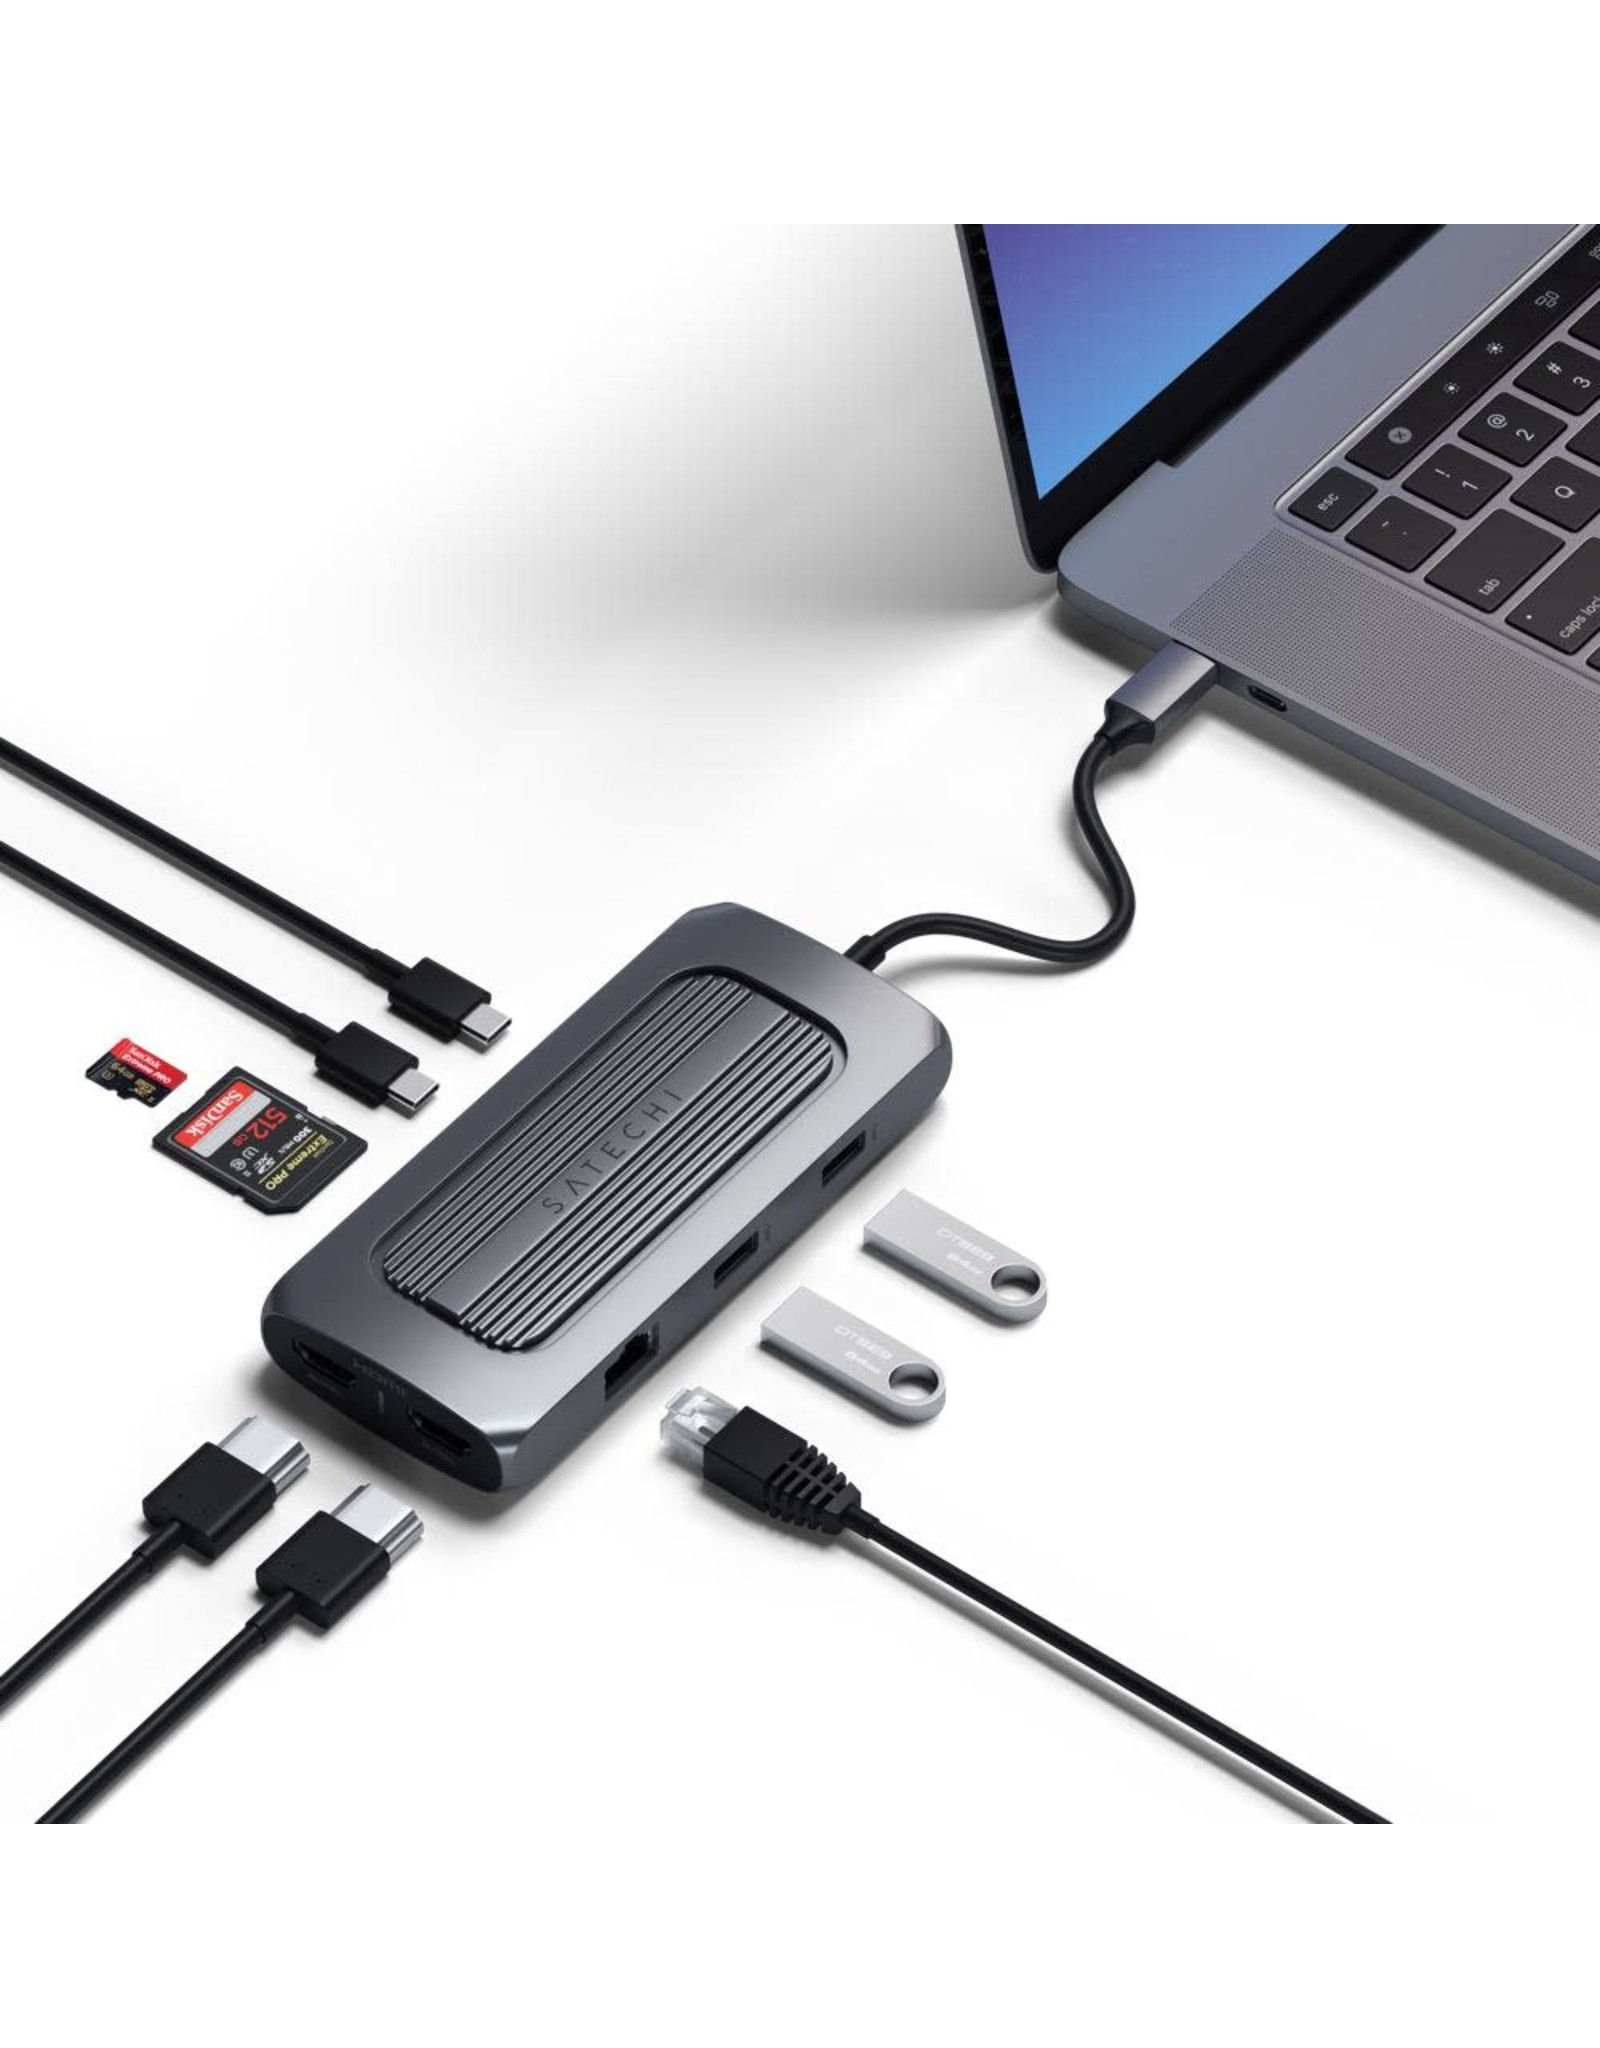 Satechi Satechi USB-C Multiport MX Adapter with dual 4K HDMI - Space Grey